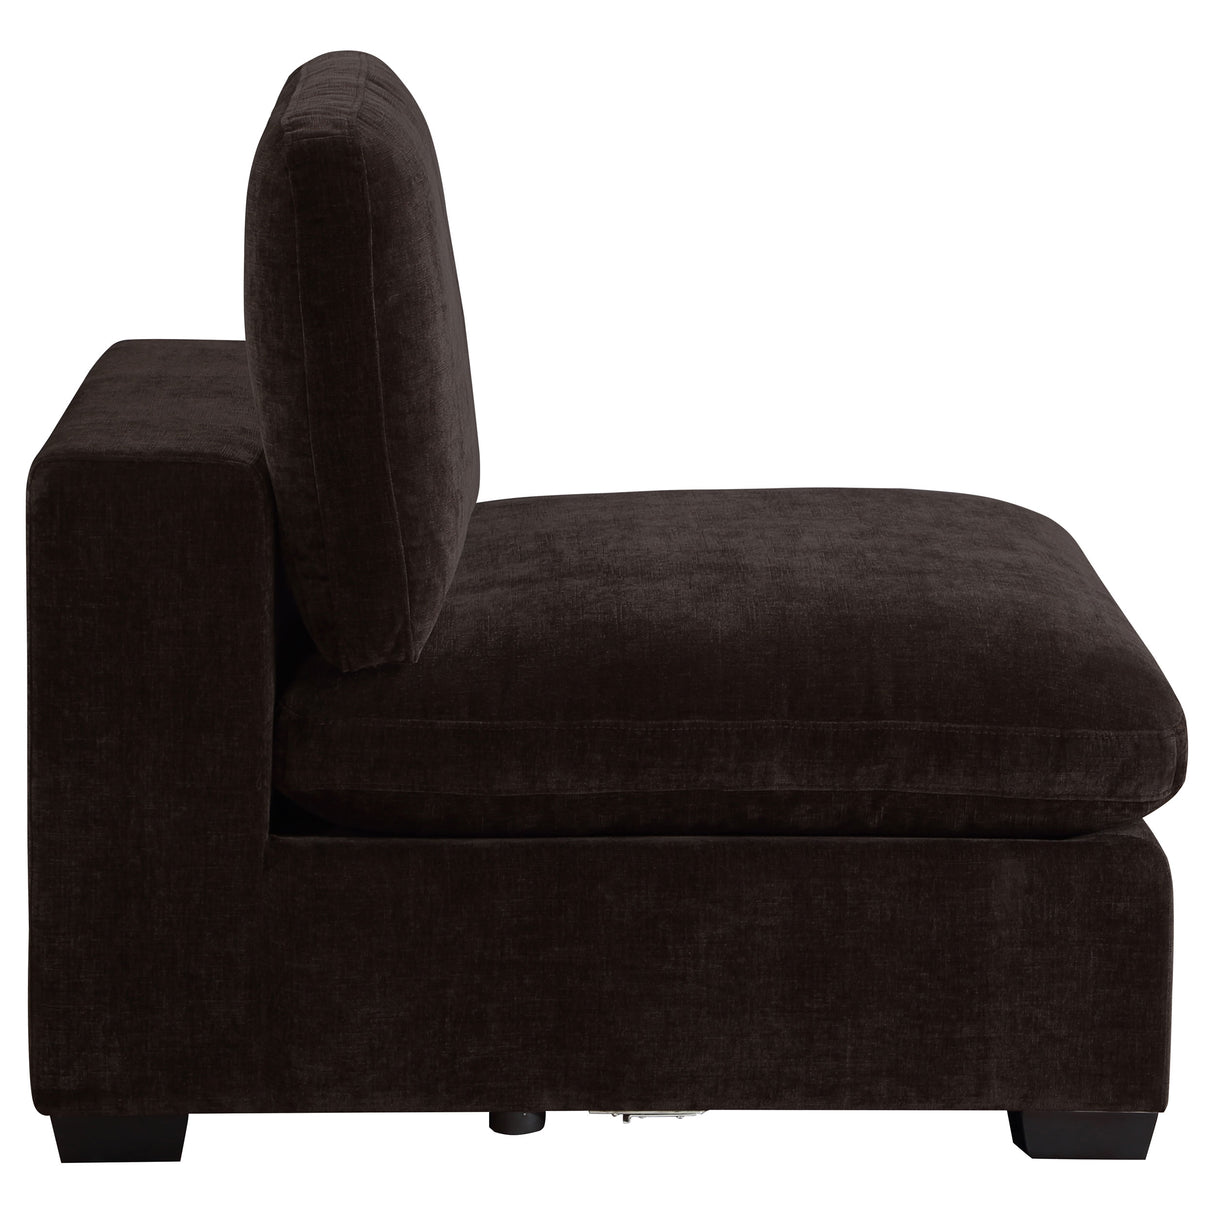 Armless Chair - Lakeview Upholstered Armless Chair Dark Chocolate